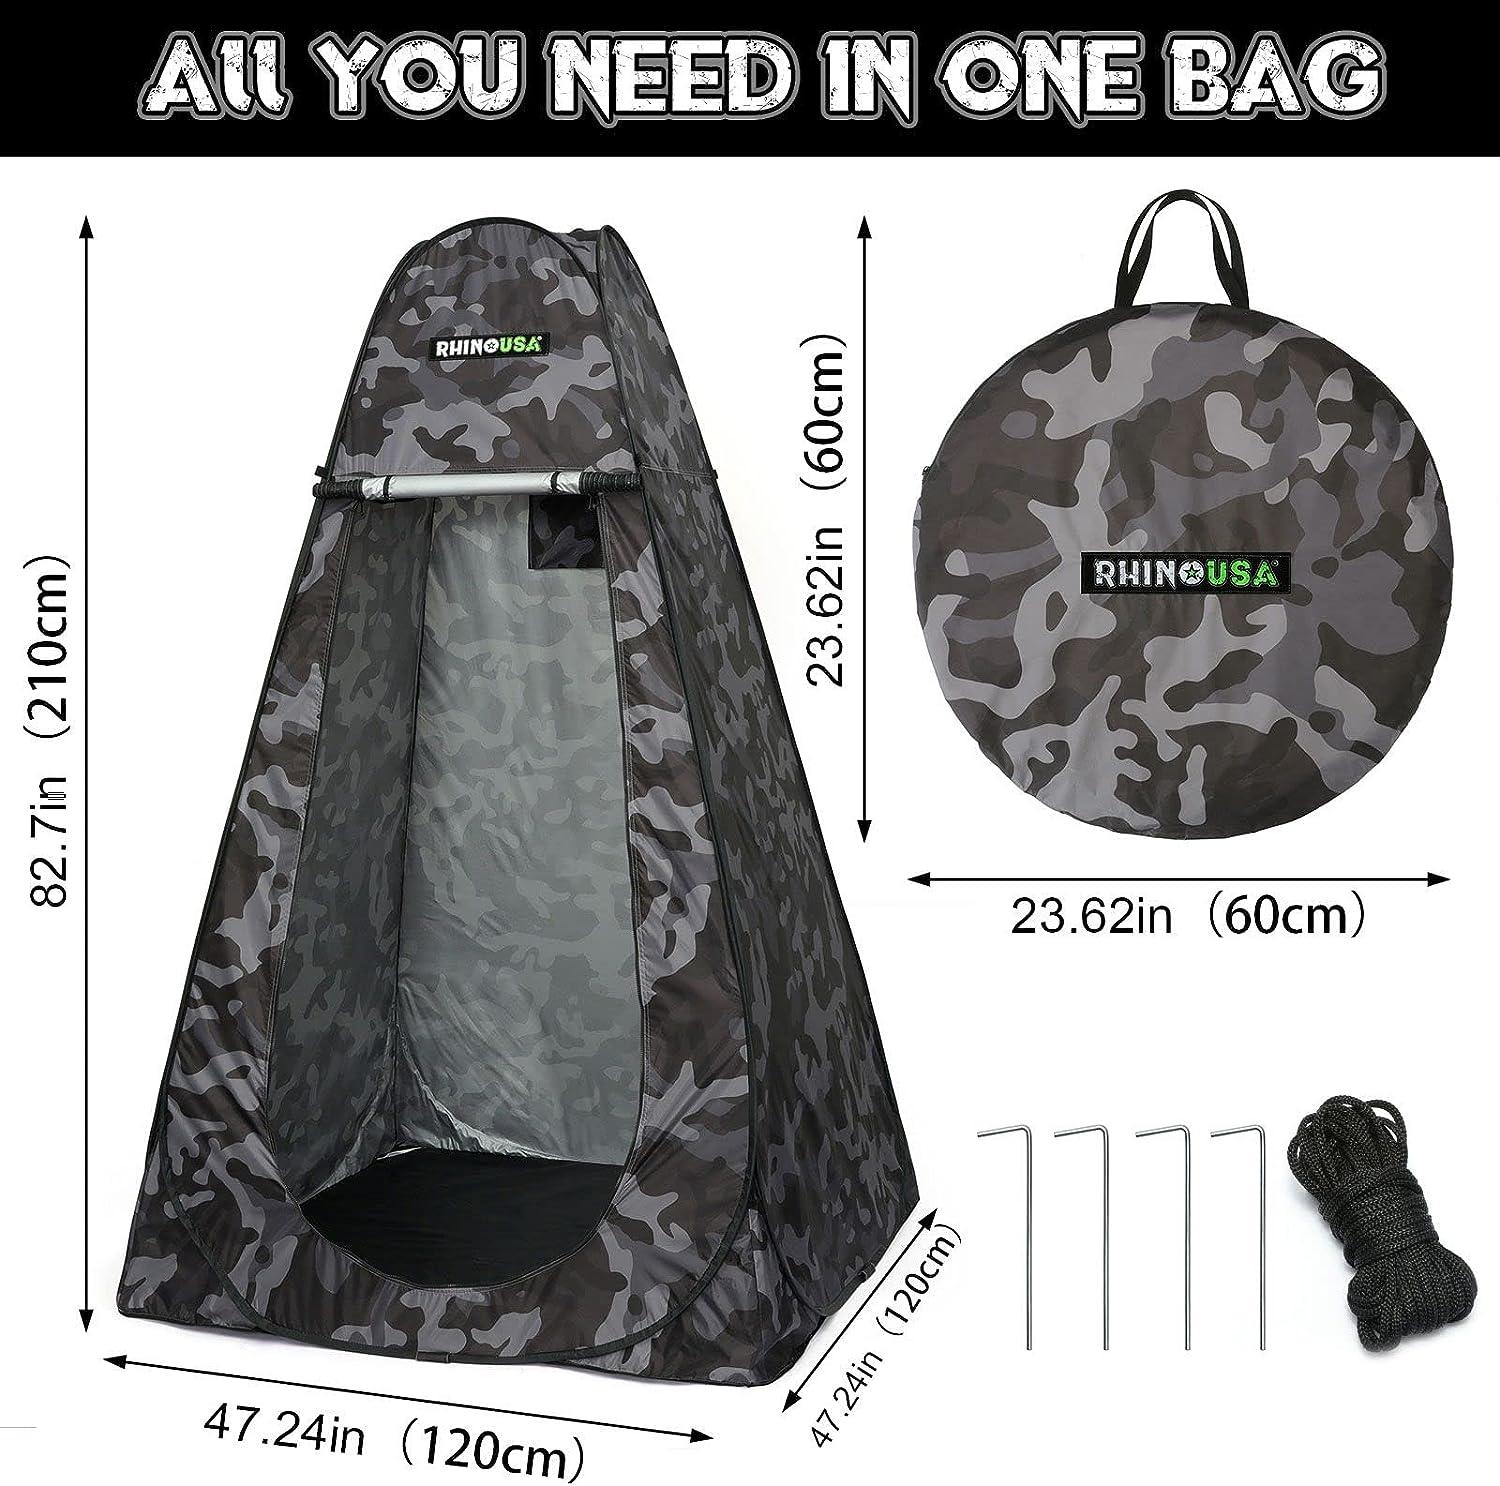 Rhino USA Portable Pop Up Privacy Changing Tent - Ultimate Outdoor Camping  Shower, Camp Toilet, Rain Shelter for Beach and Camping - Lightweight and  Sturdy, Instant Setup While On-The-Go CAMO